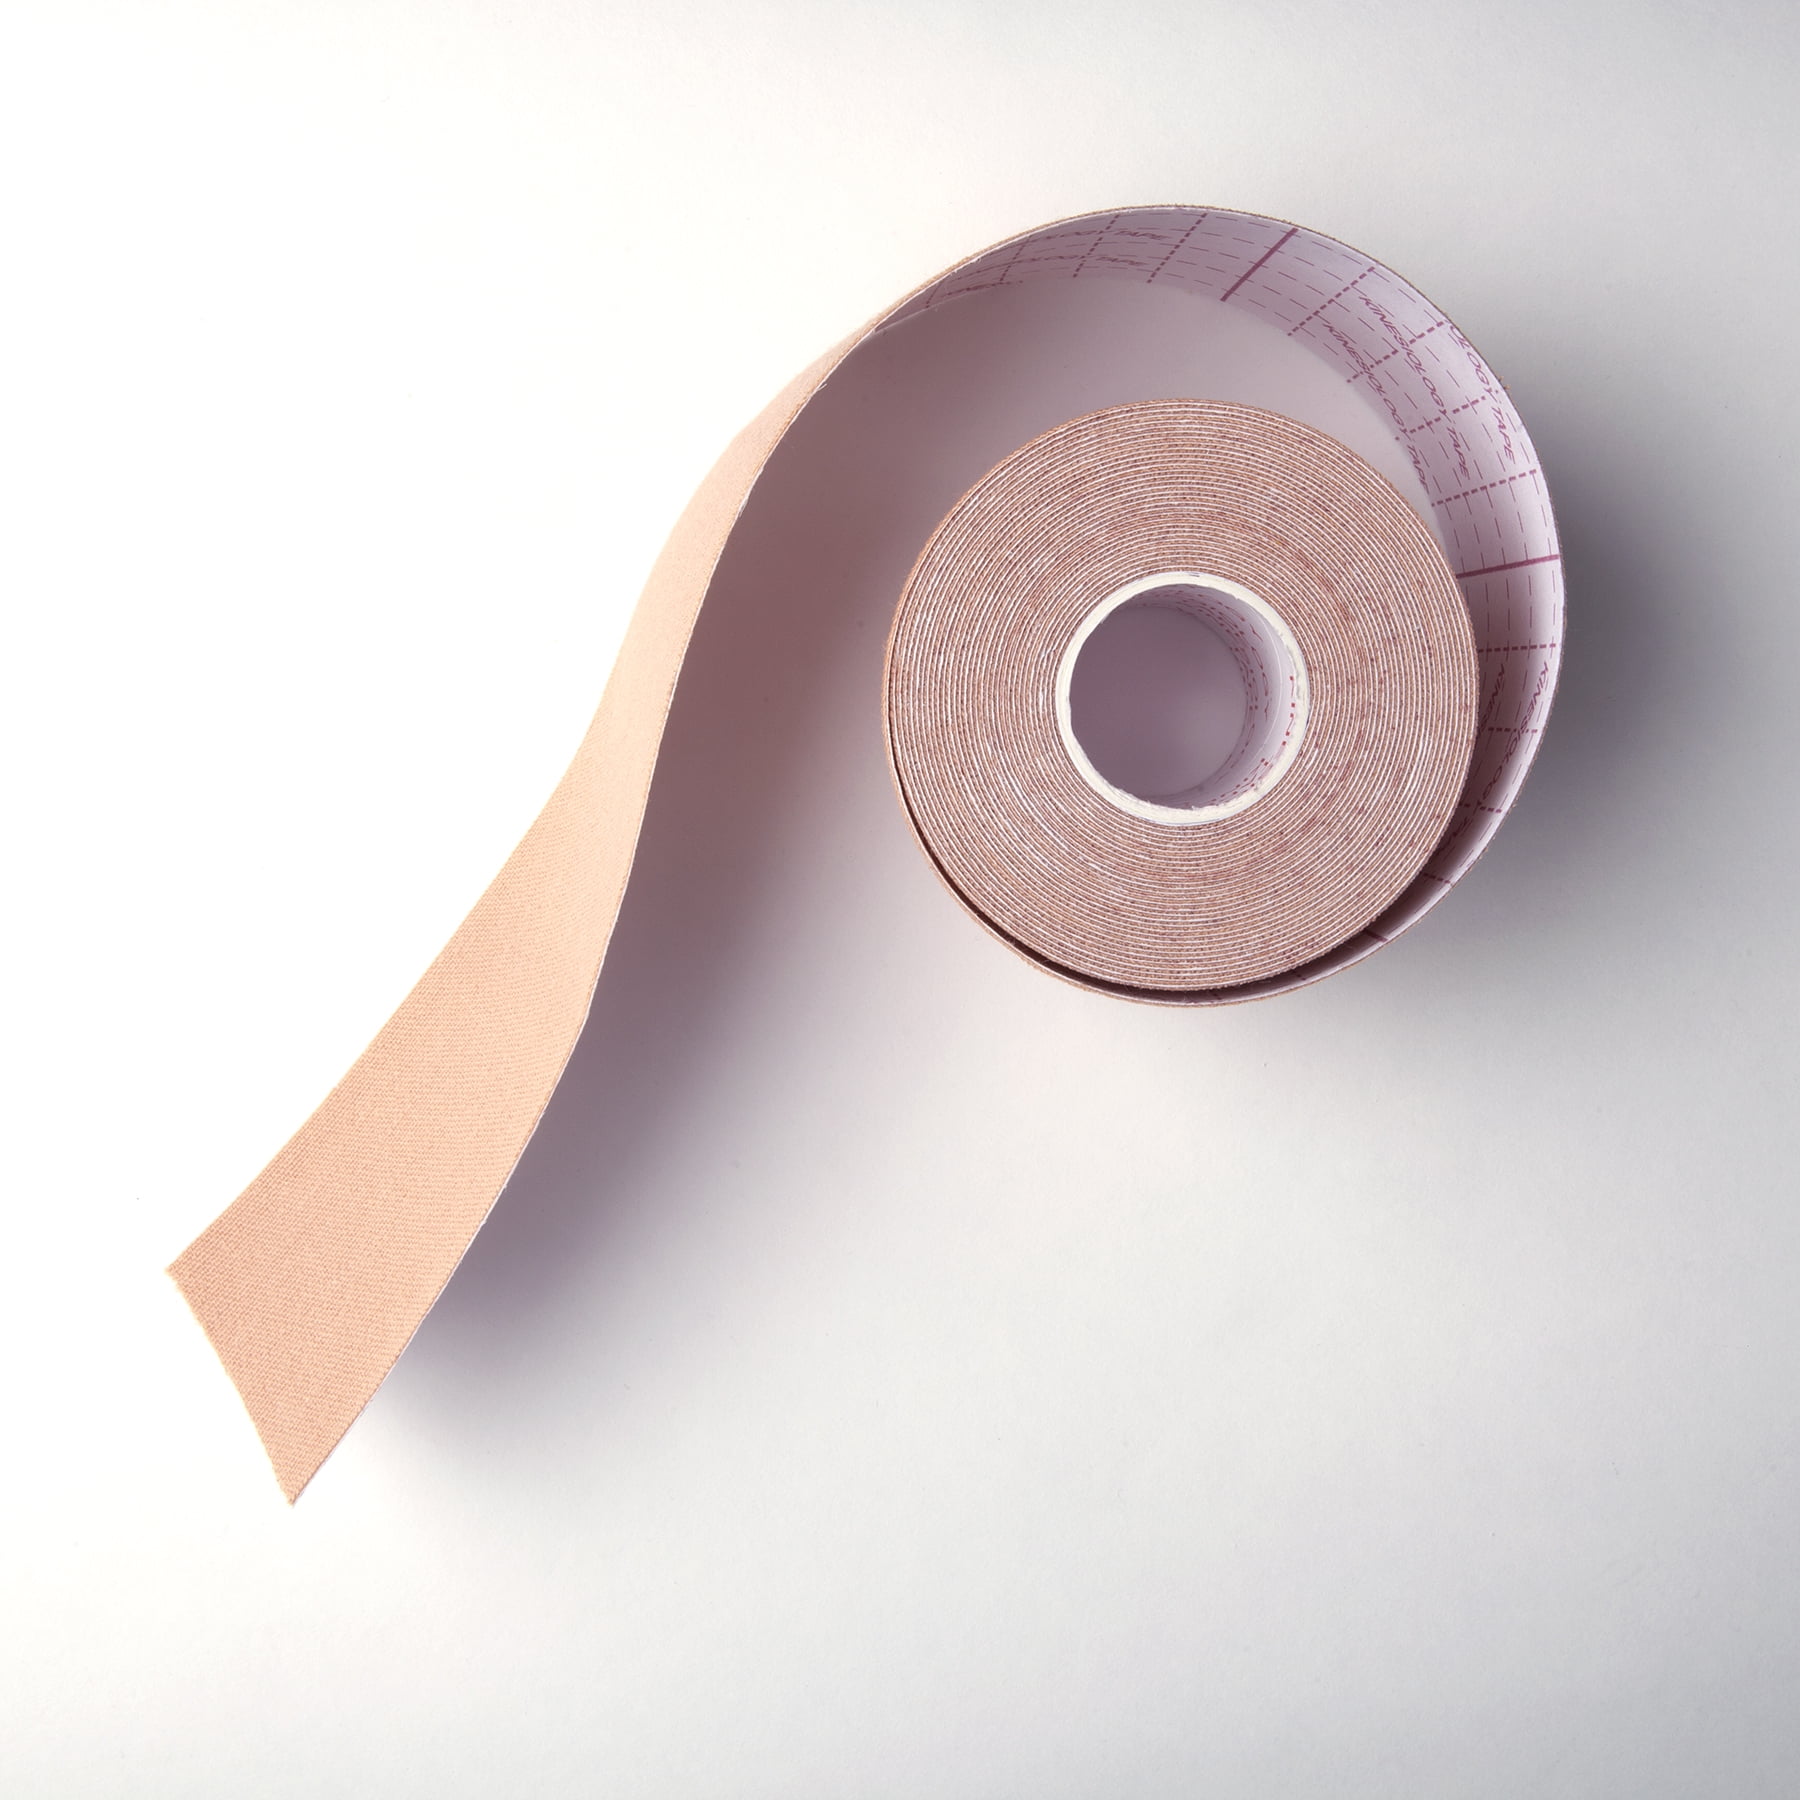 Boob Tape Kit- Replace Your Bra-Instant Breast Lift Tape with Petals,  Breathable Adhesive Sticky Bra Tape, Push Up Nipple Tap Beige